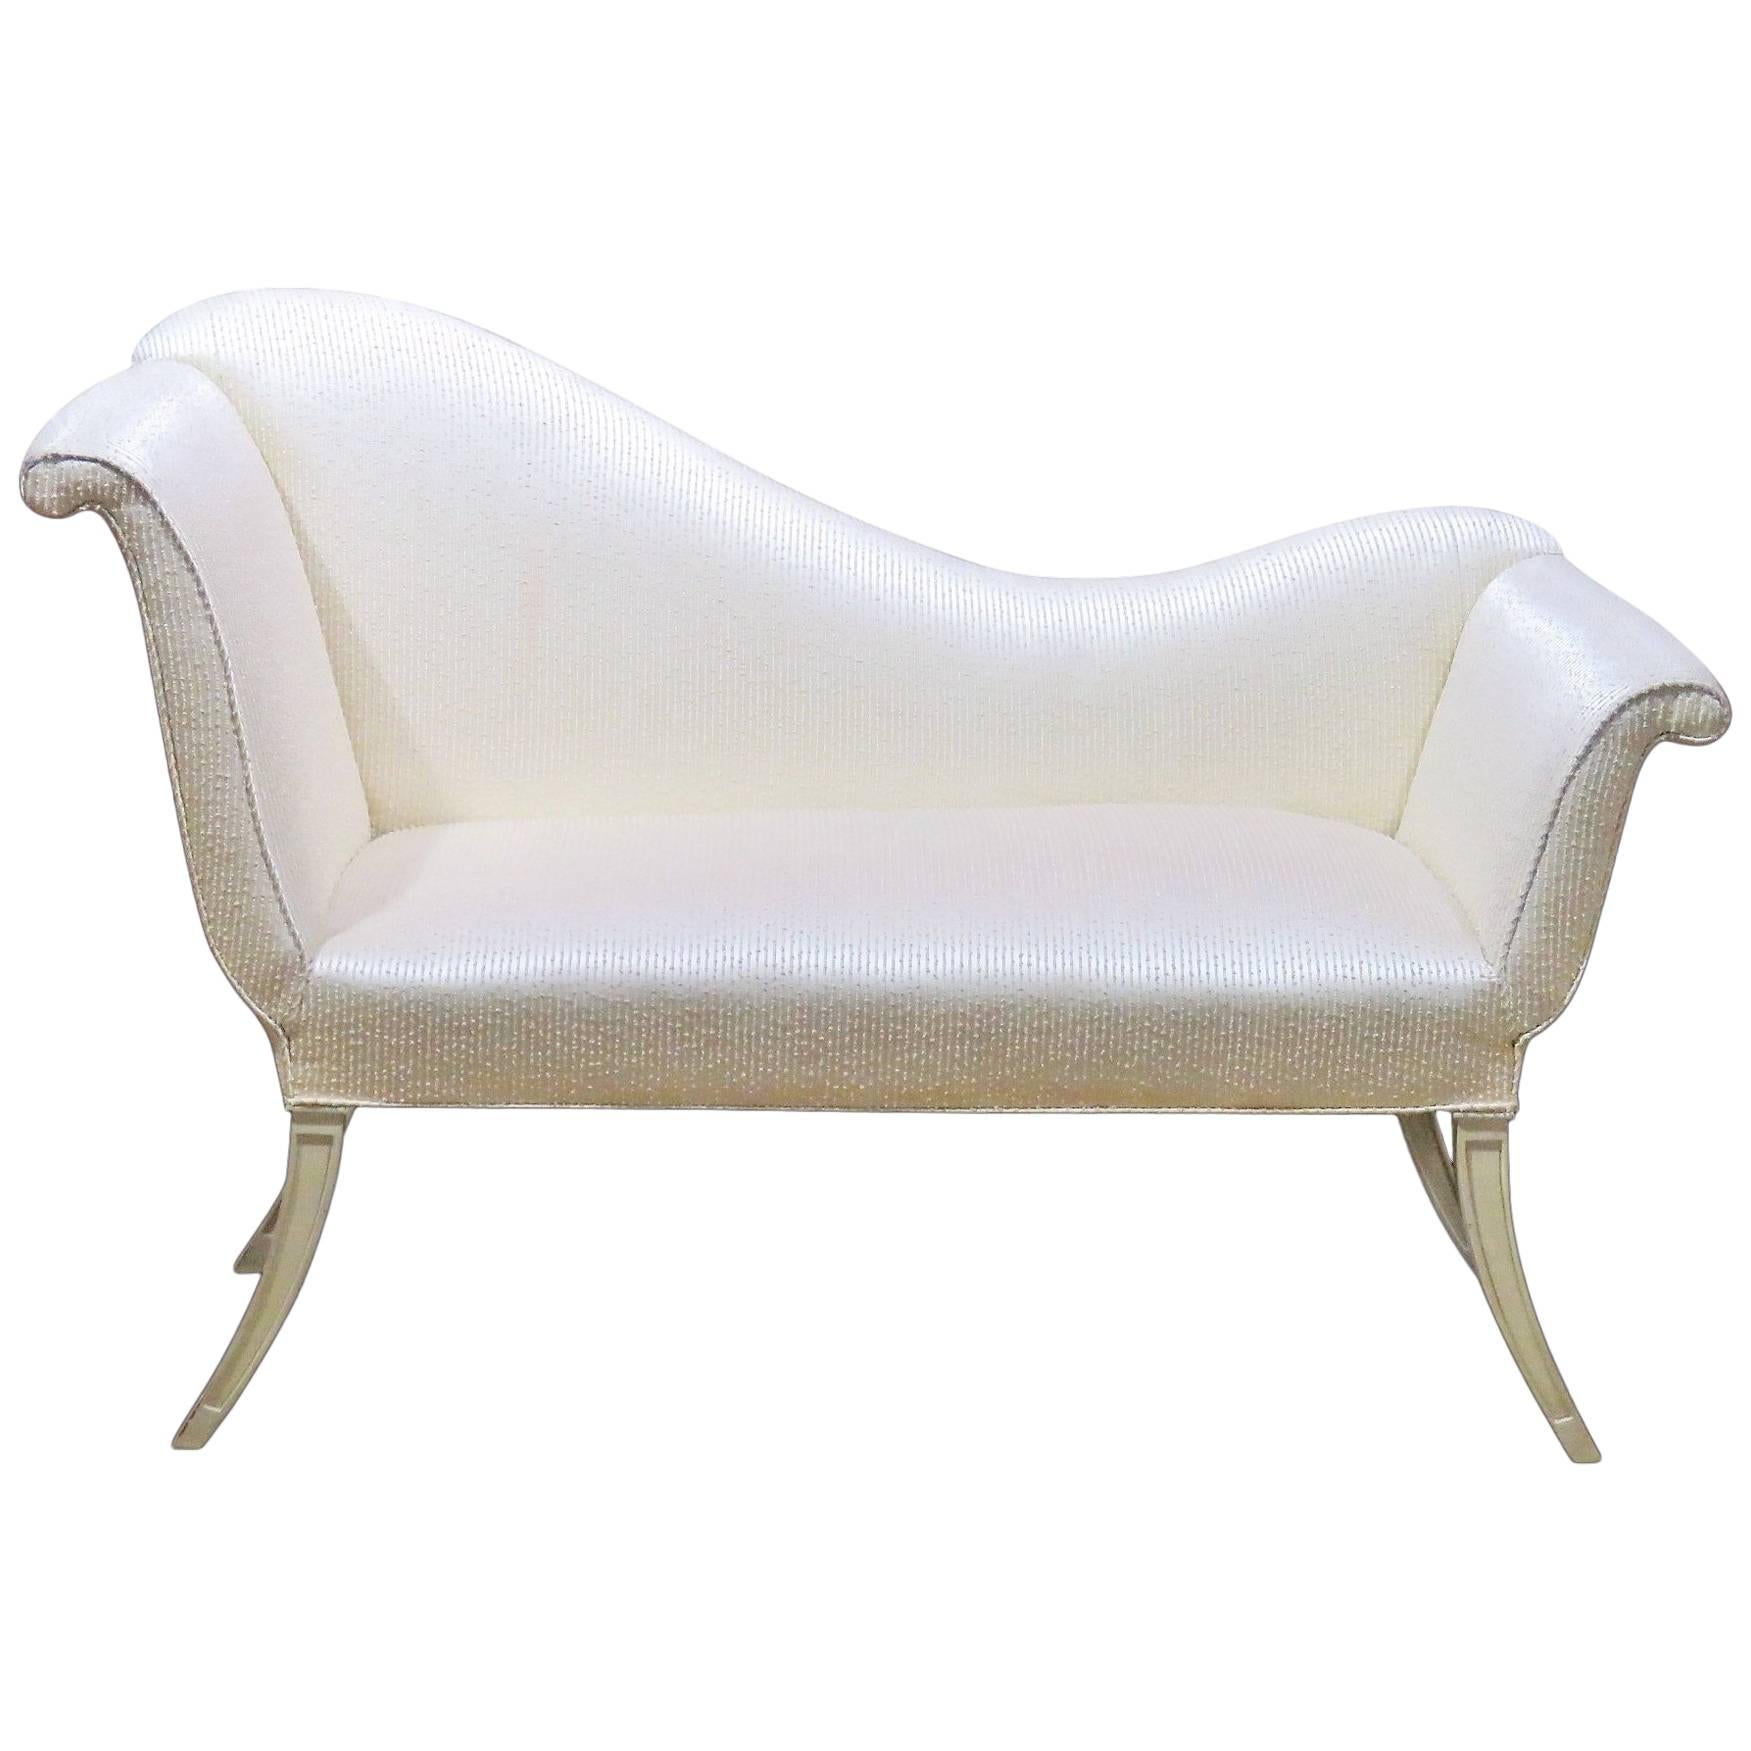 Diminutive Regency Style Cream Painted Recamier Chaise Daybed